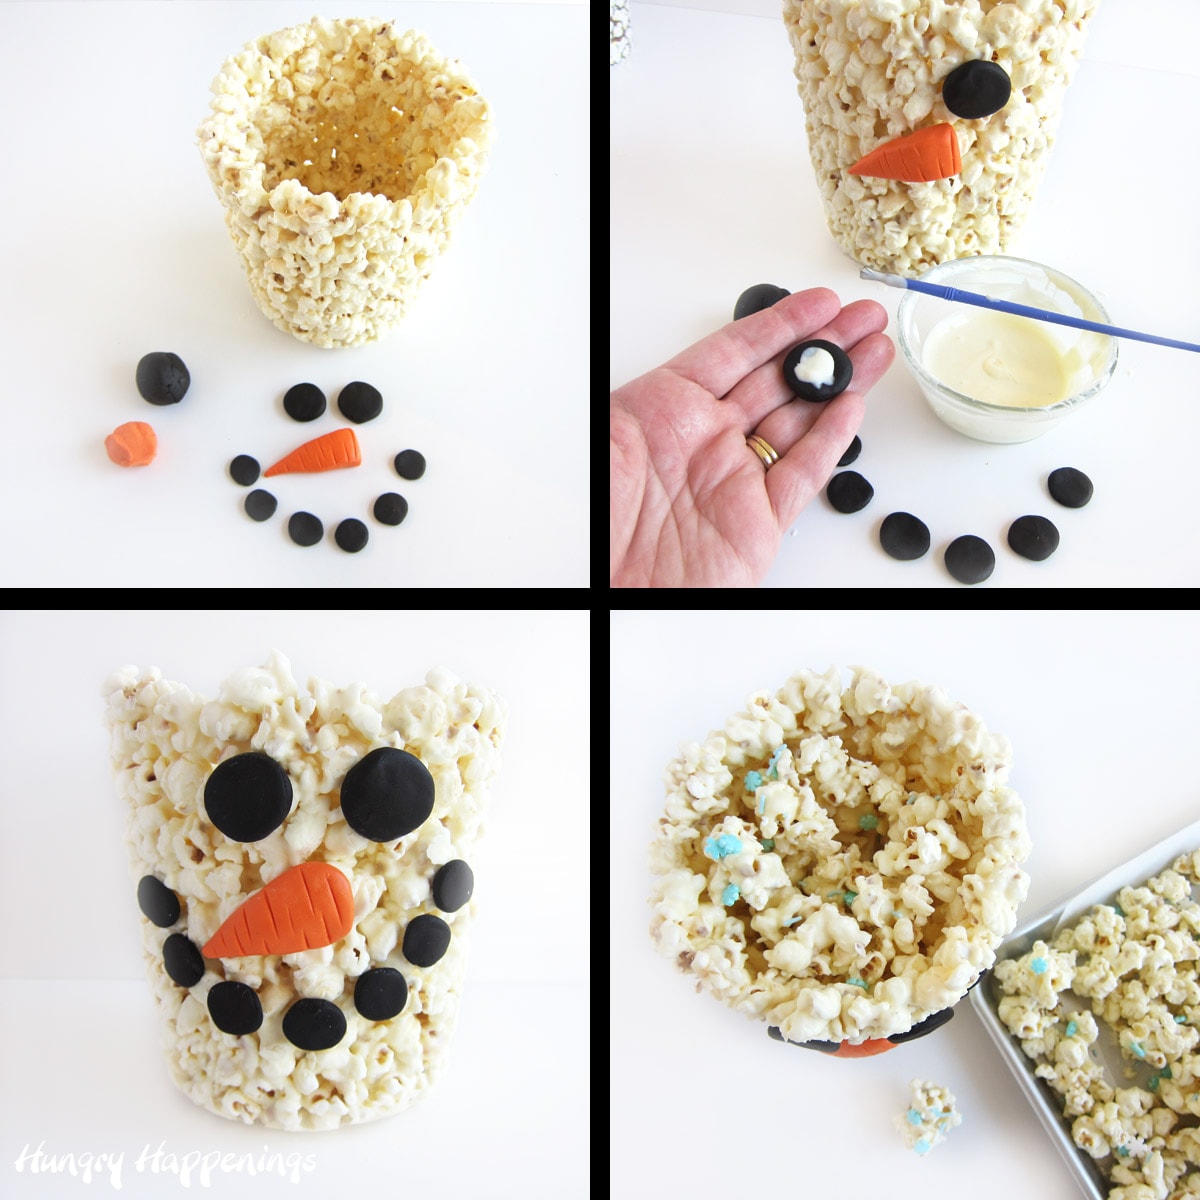 Decorate the snowman popcorn bucket with modeling chocolate.